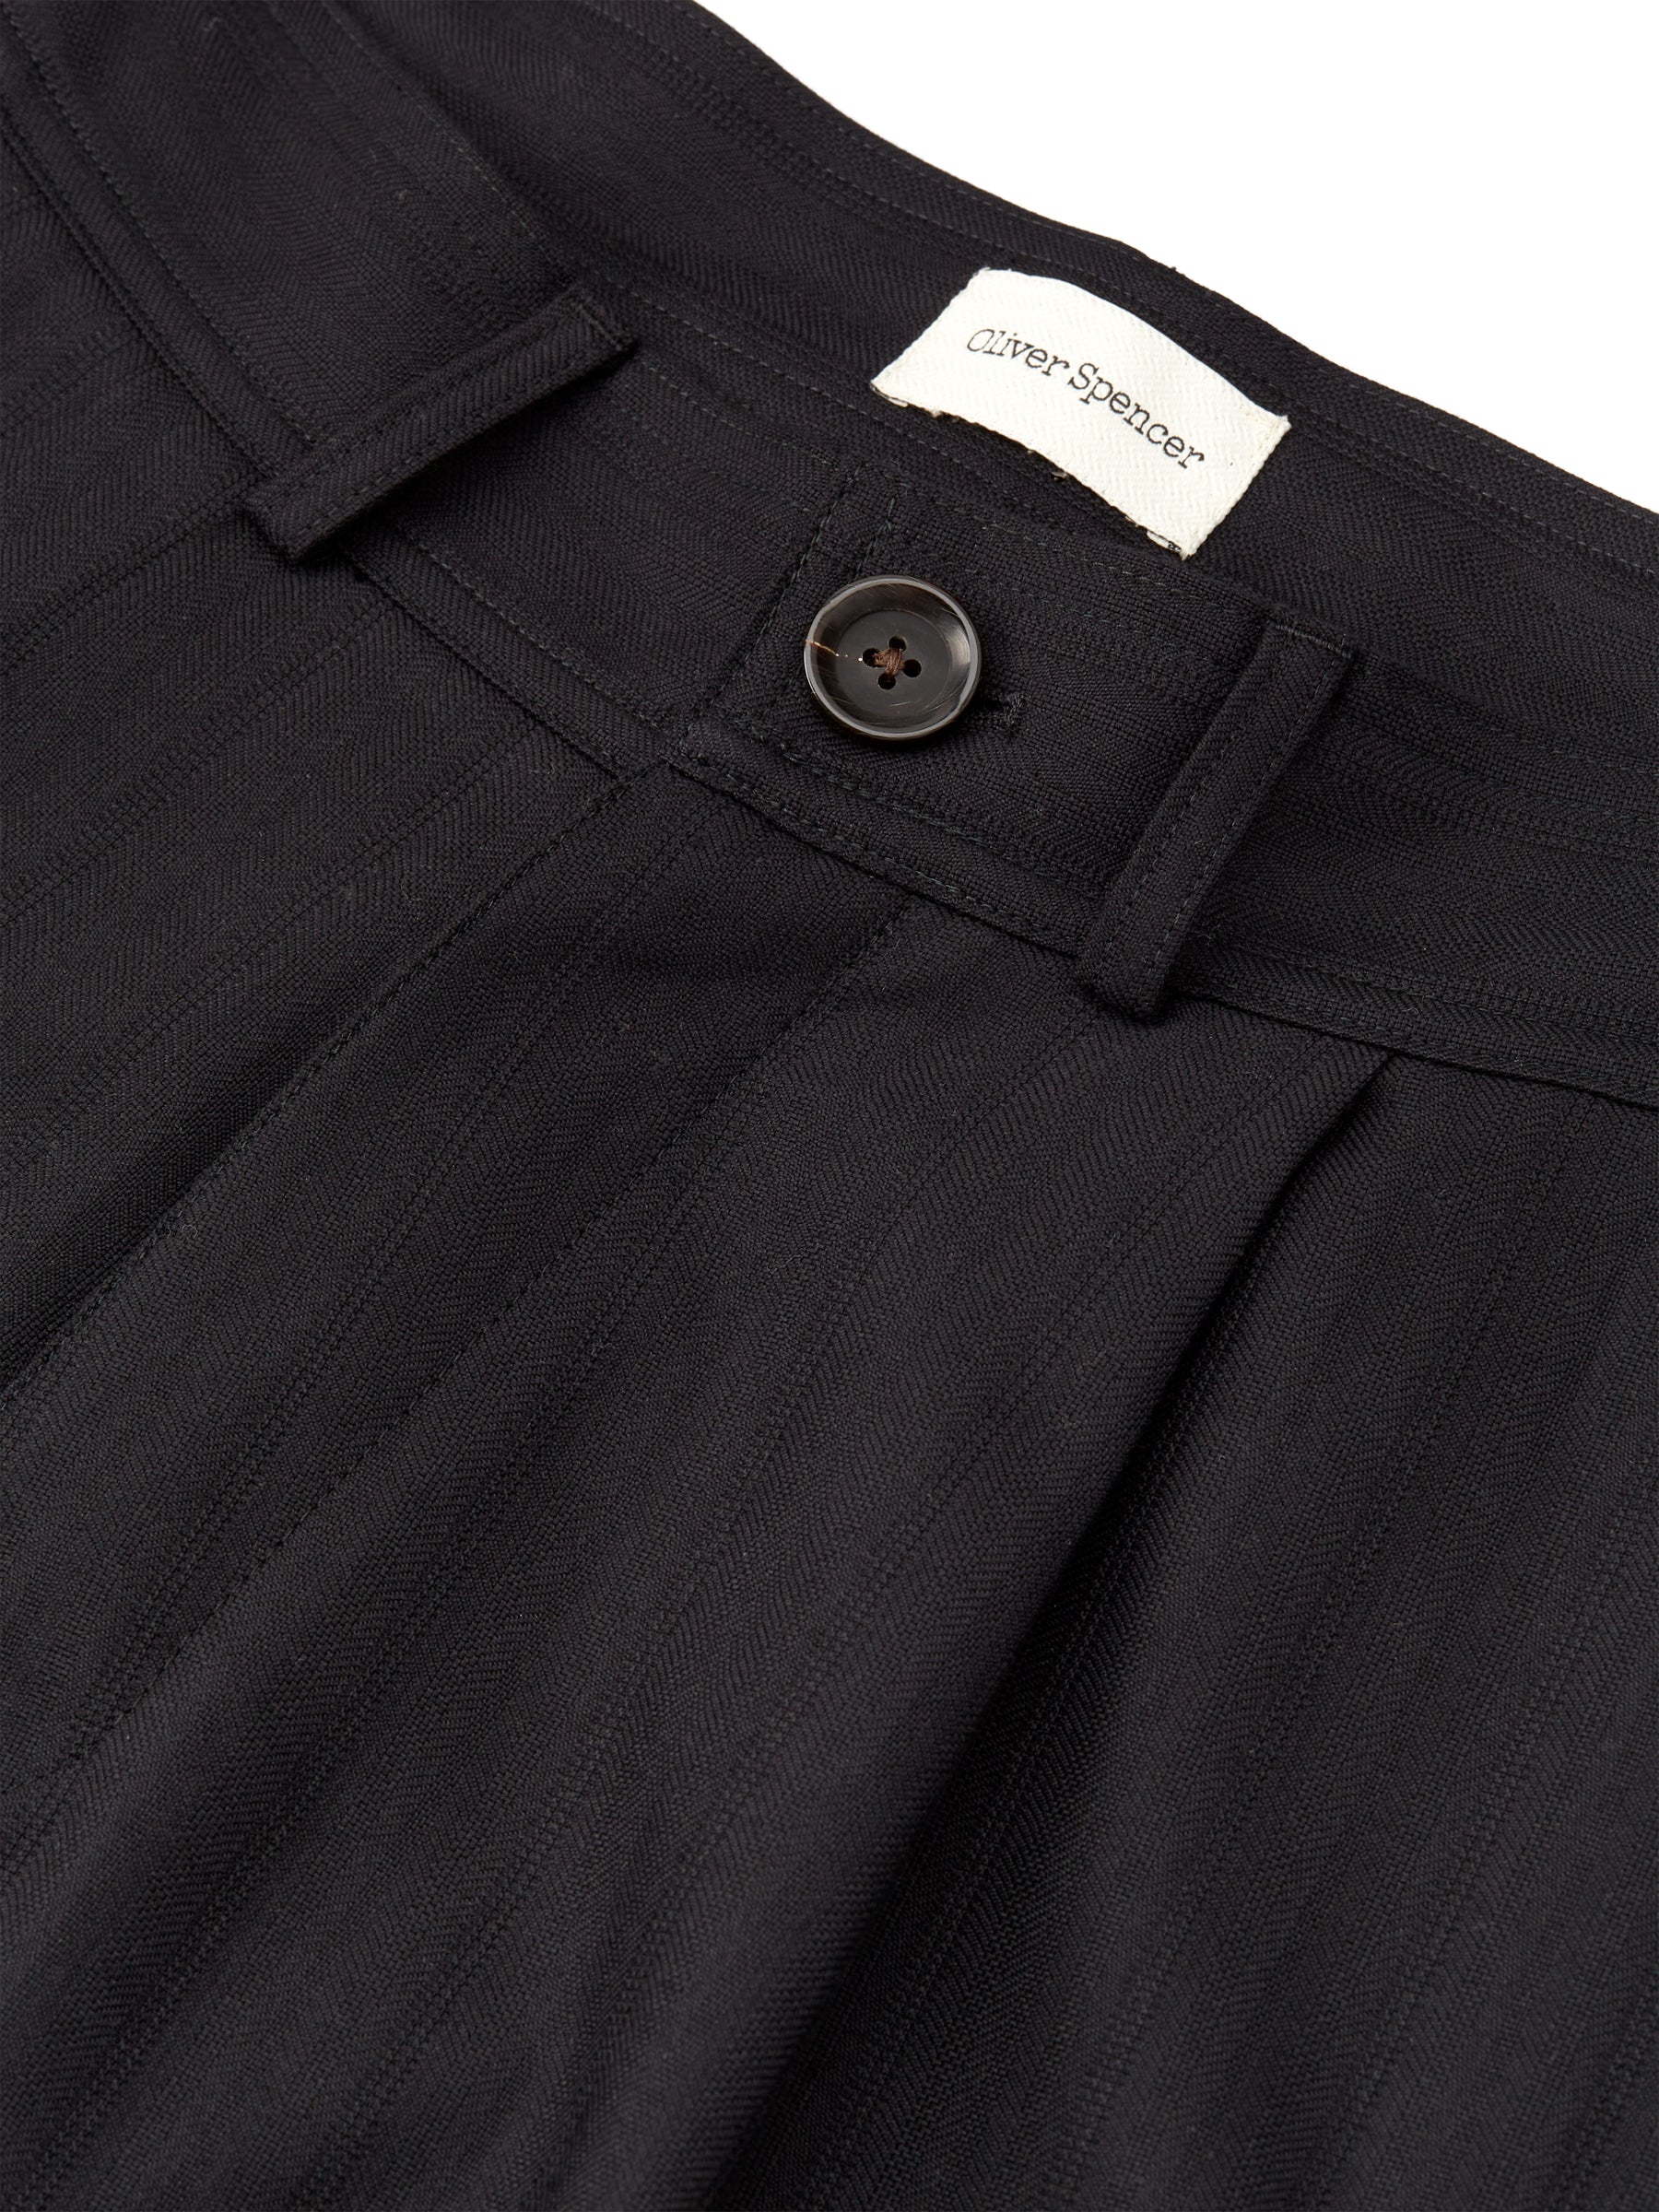 Pleated Trousers Fairview Black